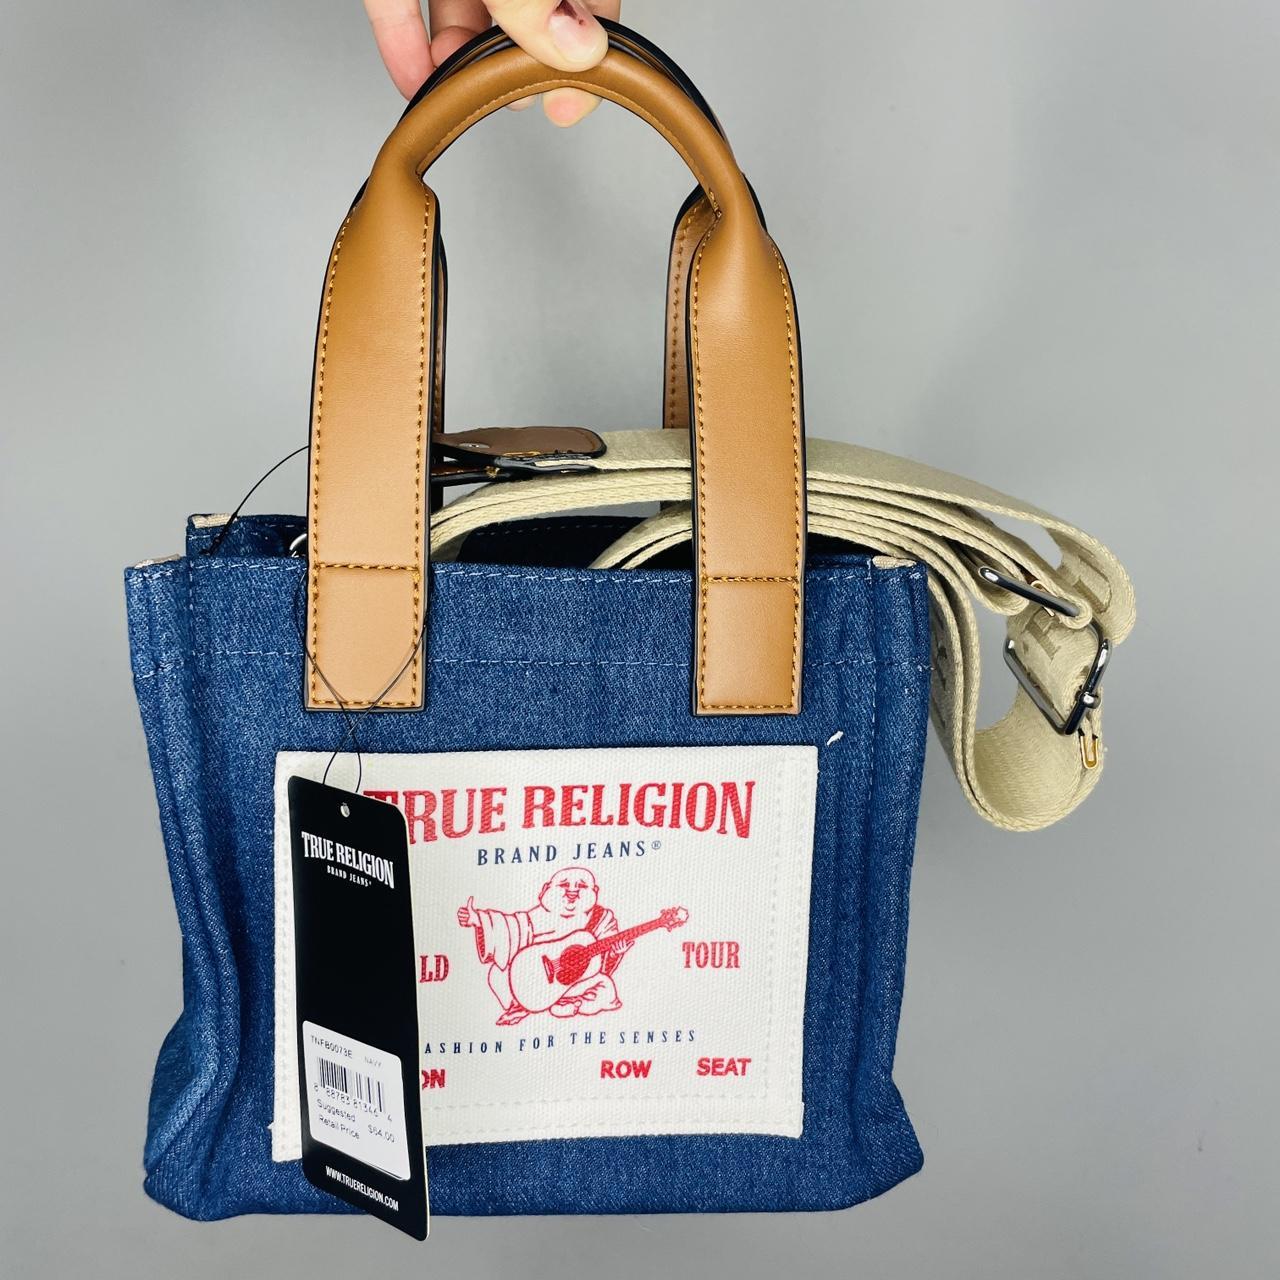 Discover Genuine Luxury Bags at Bag Religion